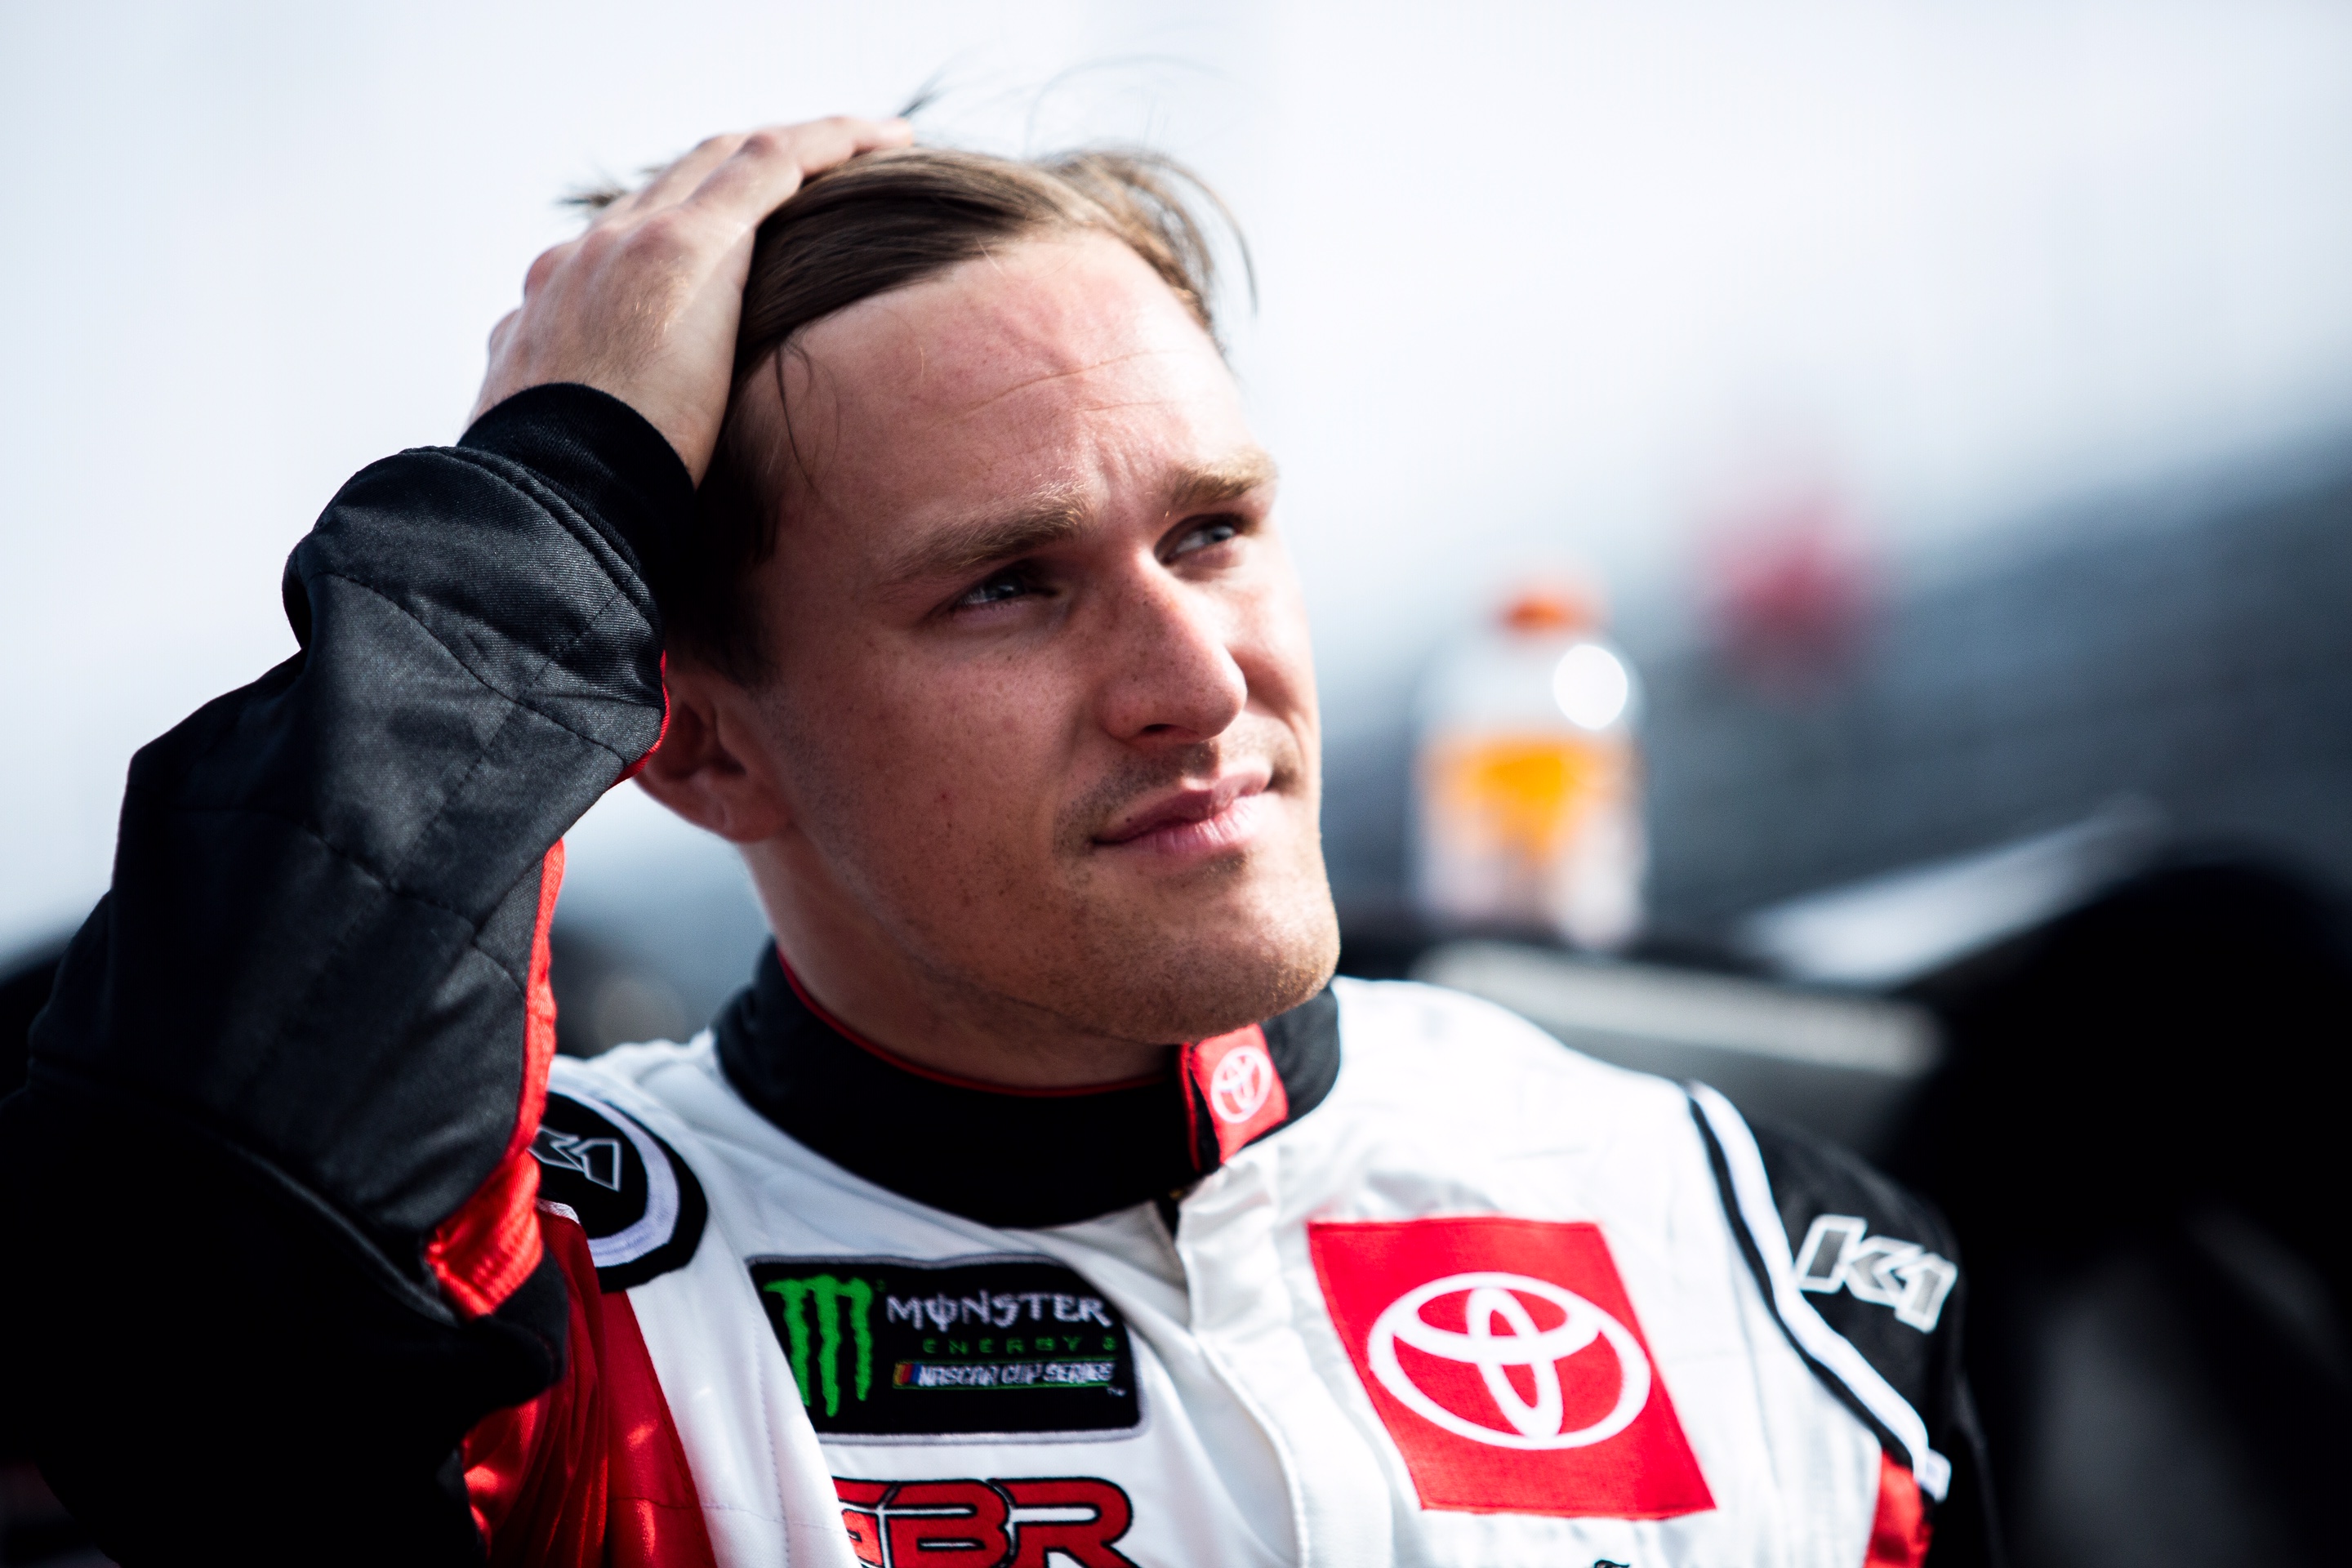 On the contrary, perhaps Kligerman's made his case for best hair in racing. (Photo Credit: Chris Taylor)